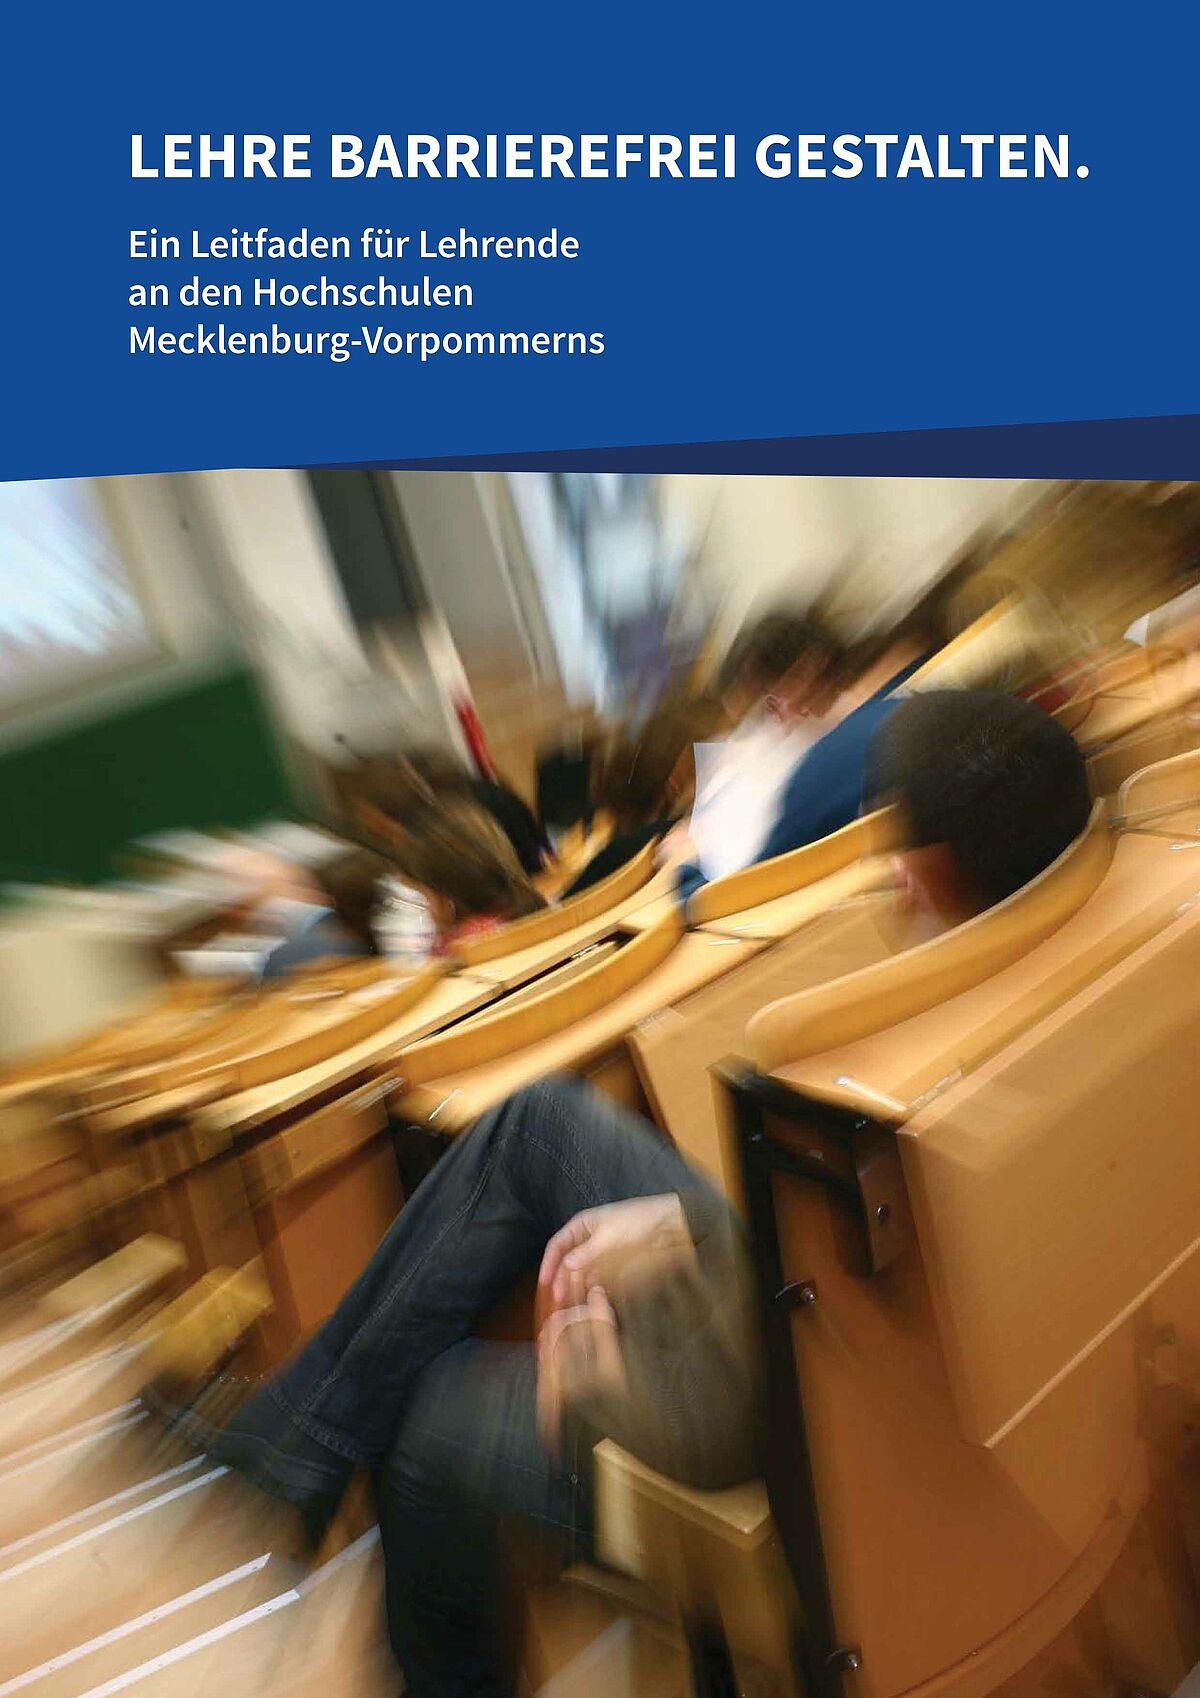 Cover of the guide for barrier-free teaching: lecture hall